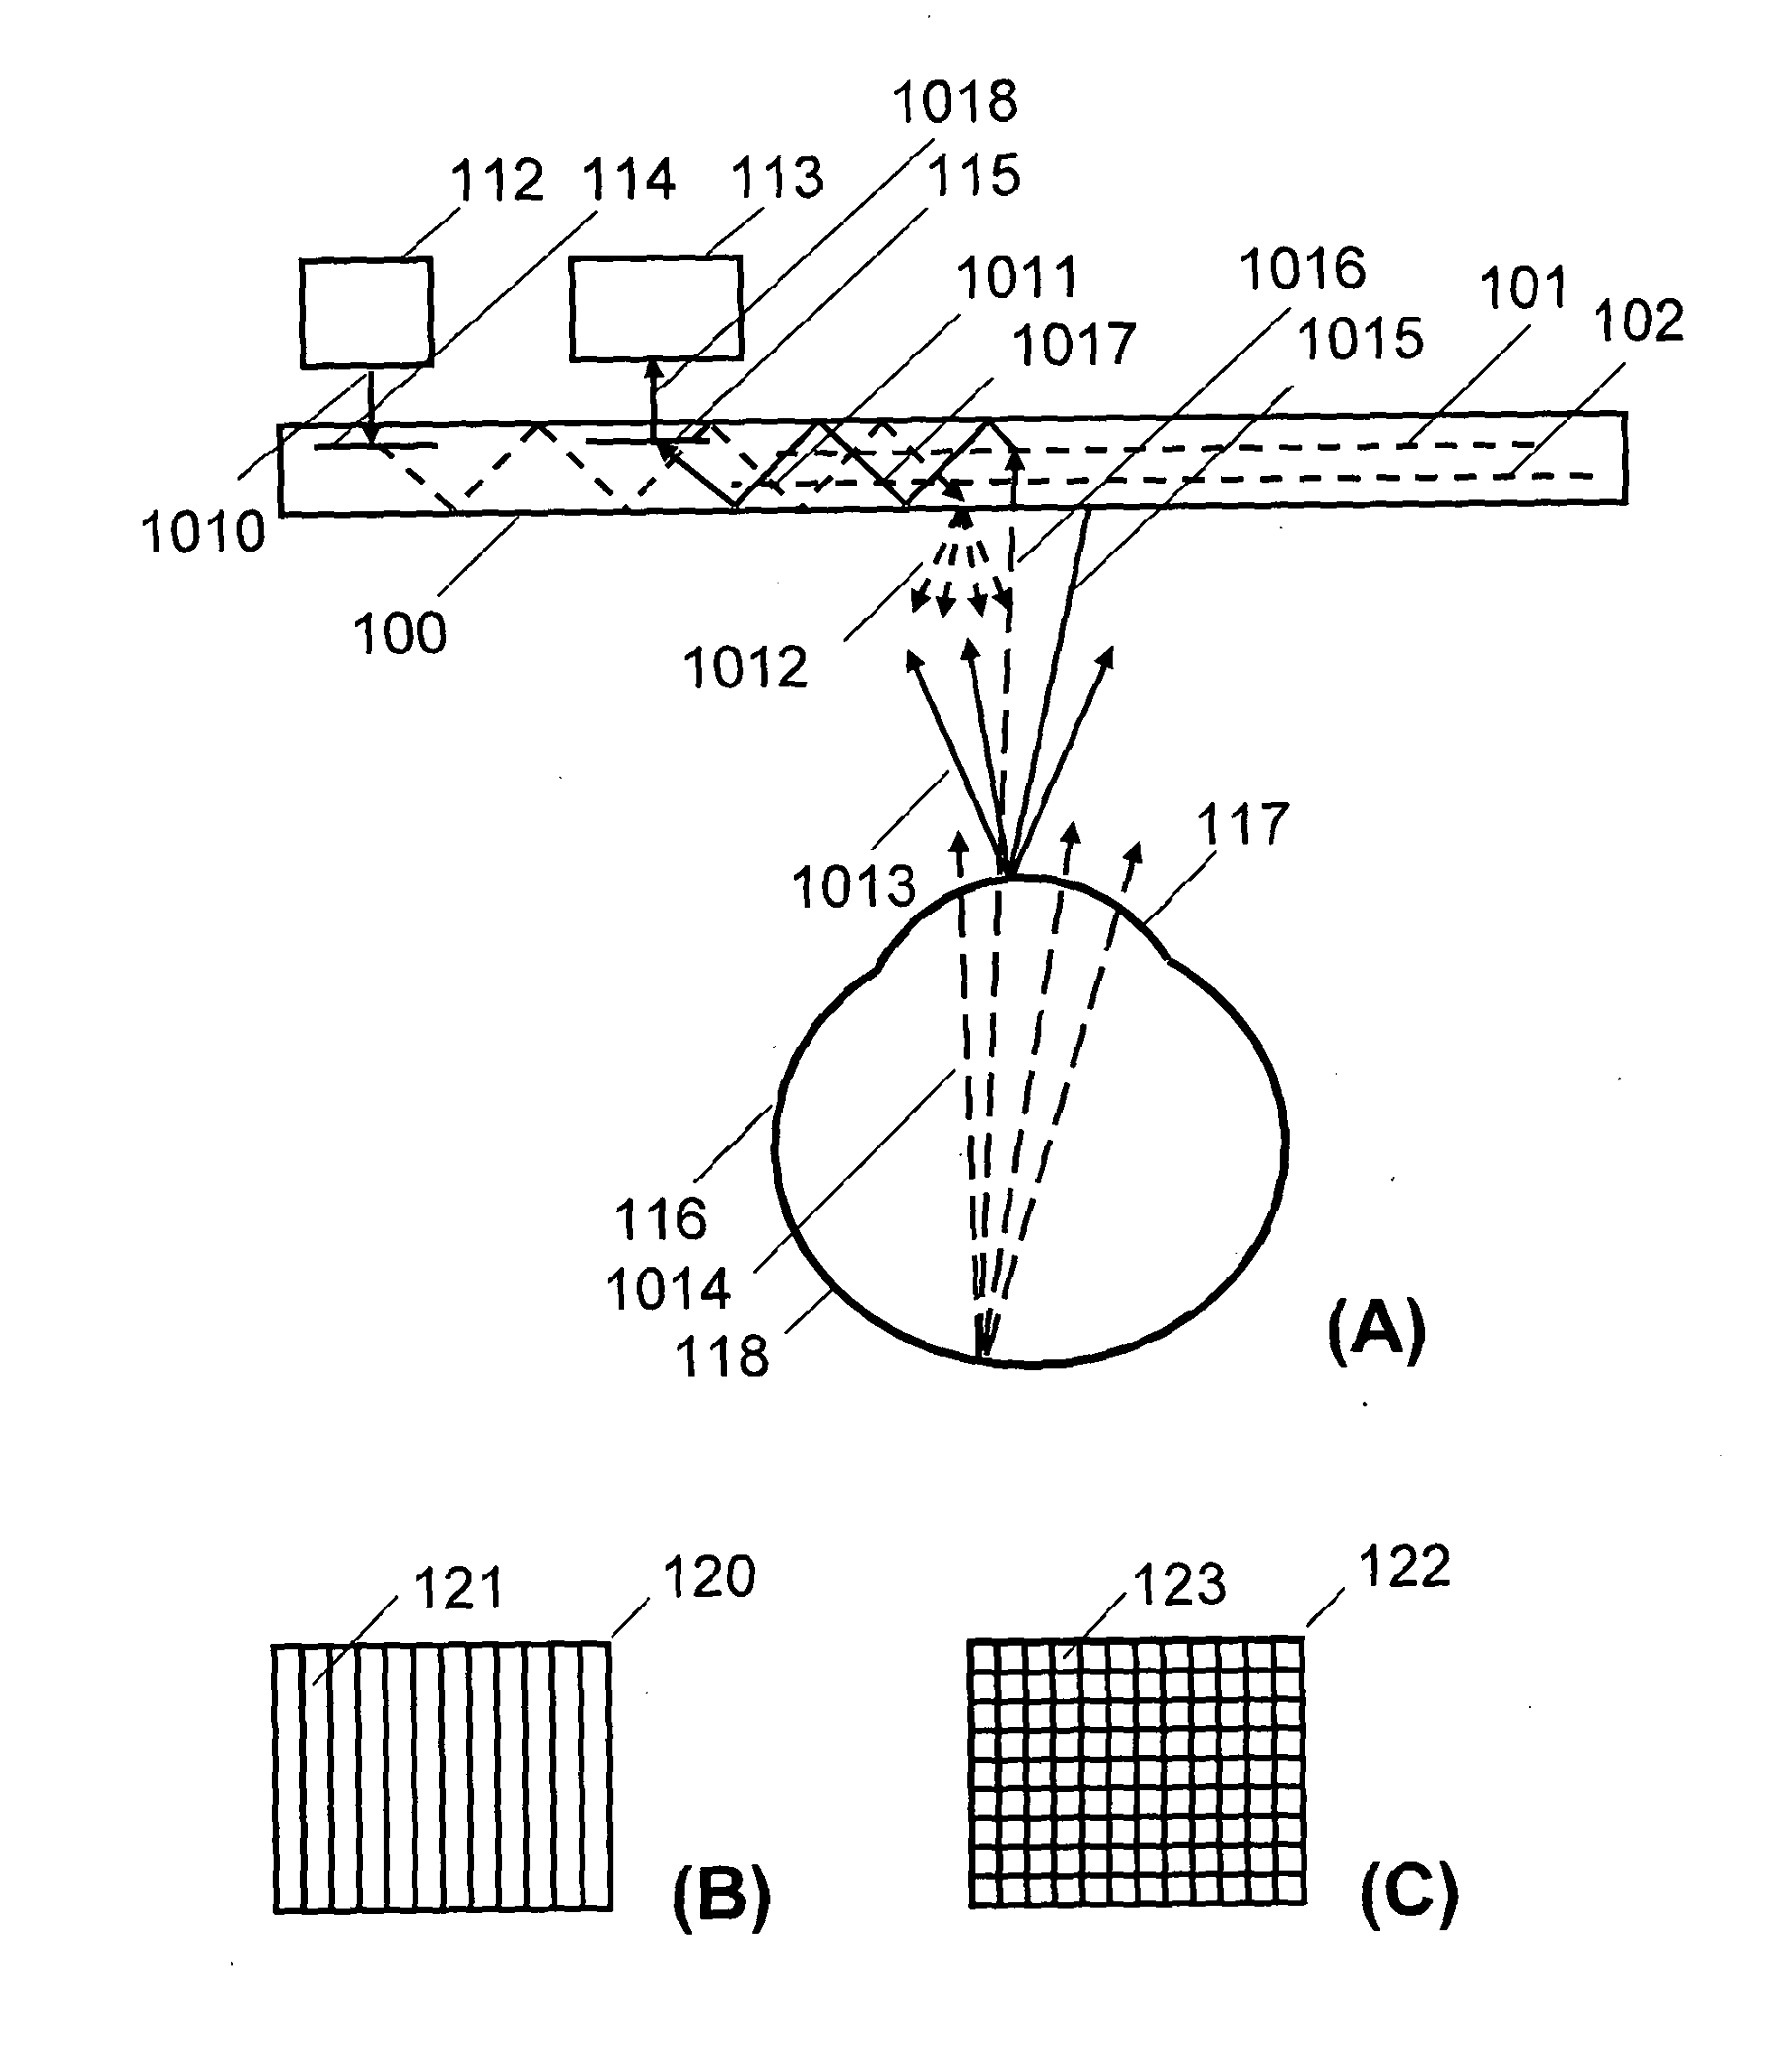 Apparatus for eye tracking